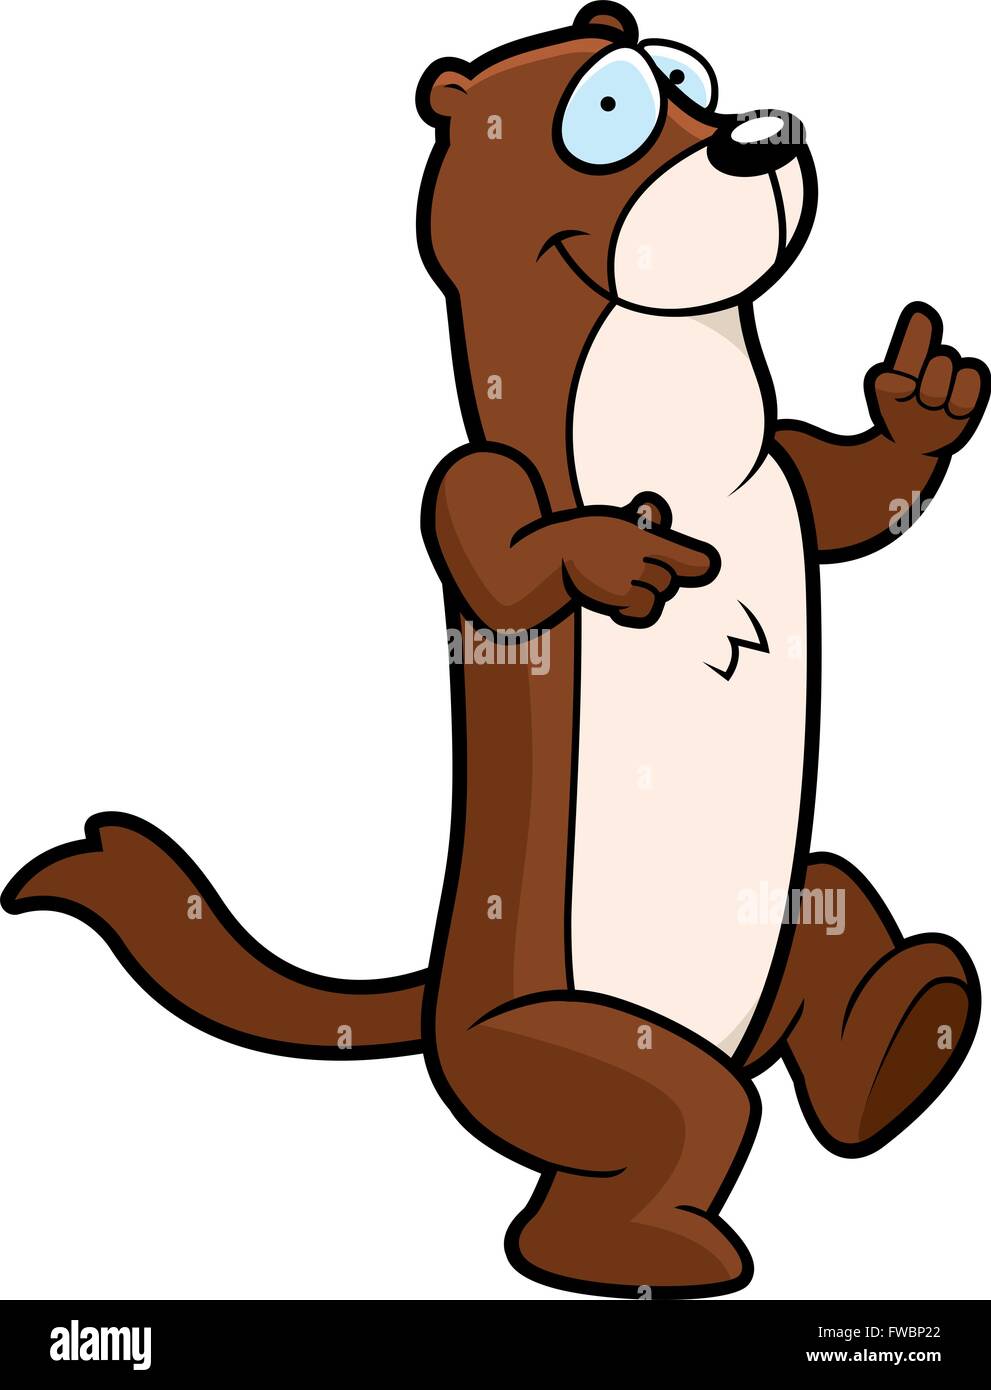 A happy cartoon weasel dancing and smiling. Stock Vector